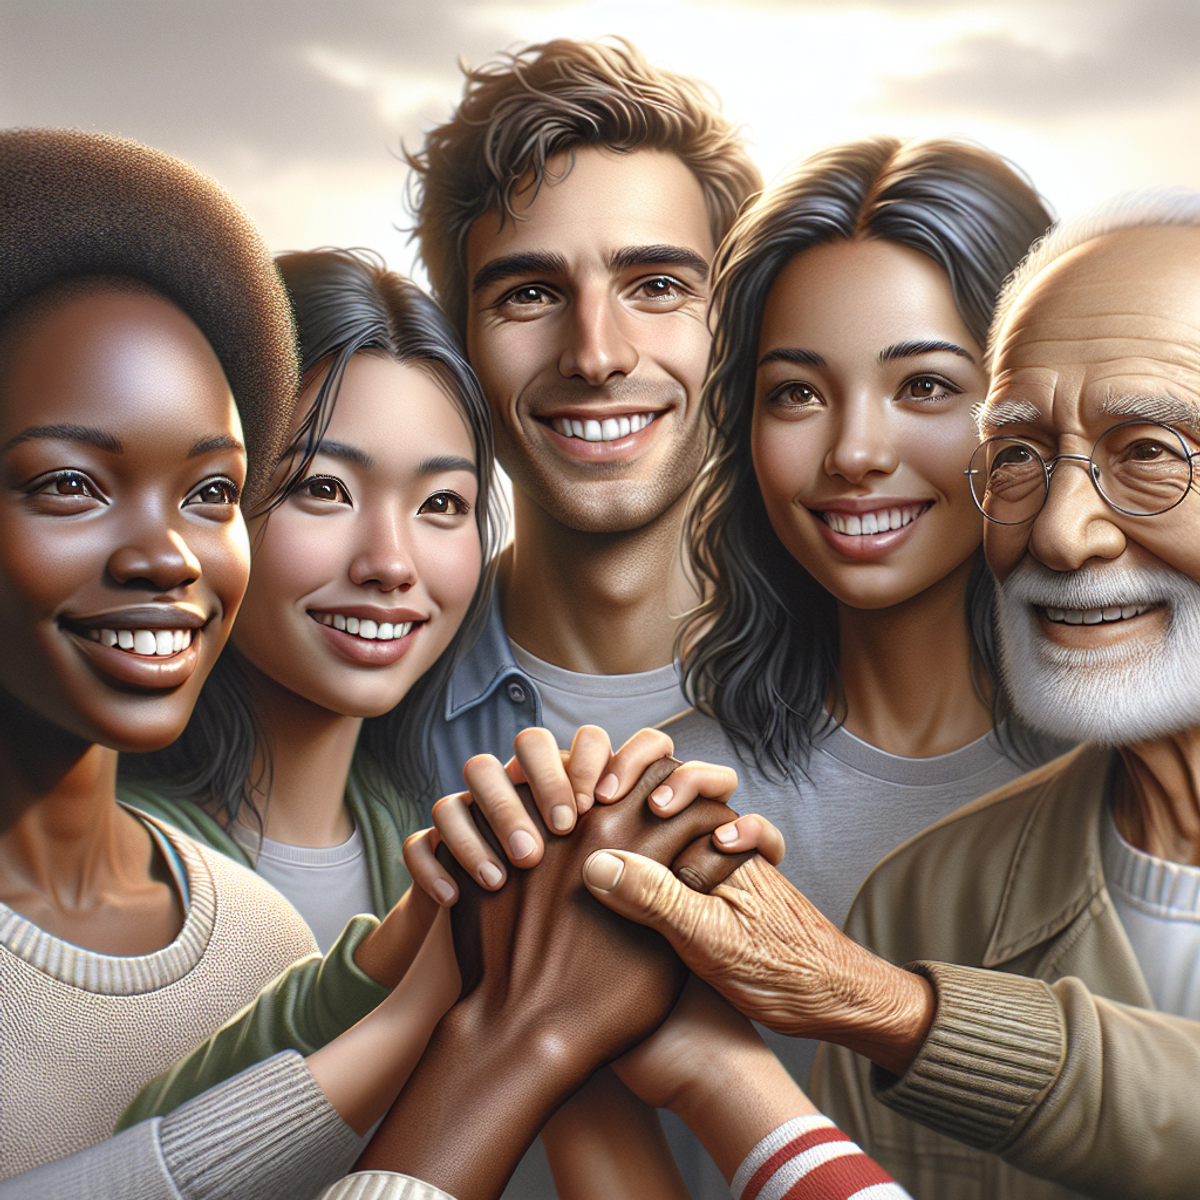 A diverse group of people of different ages and ethnicities holding hands with joyful expressions, symbolizing unity and empowerment.